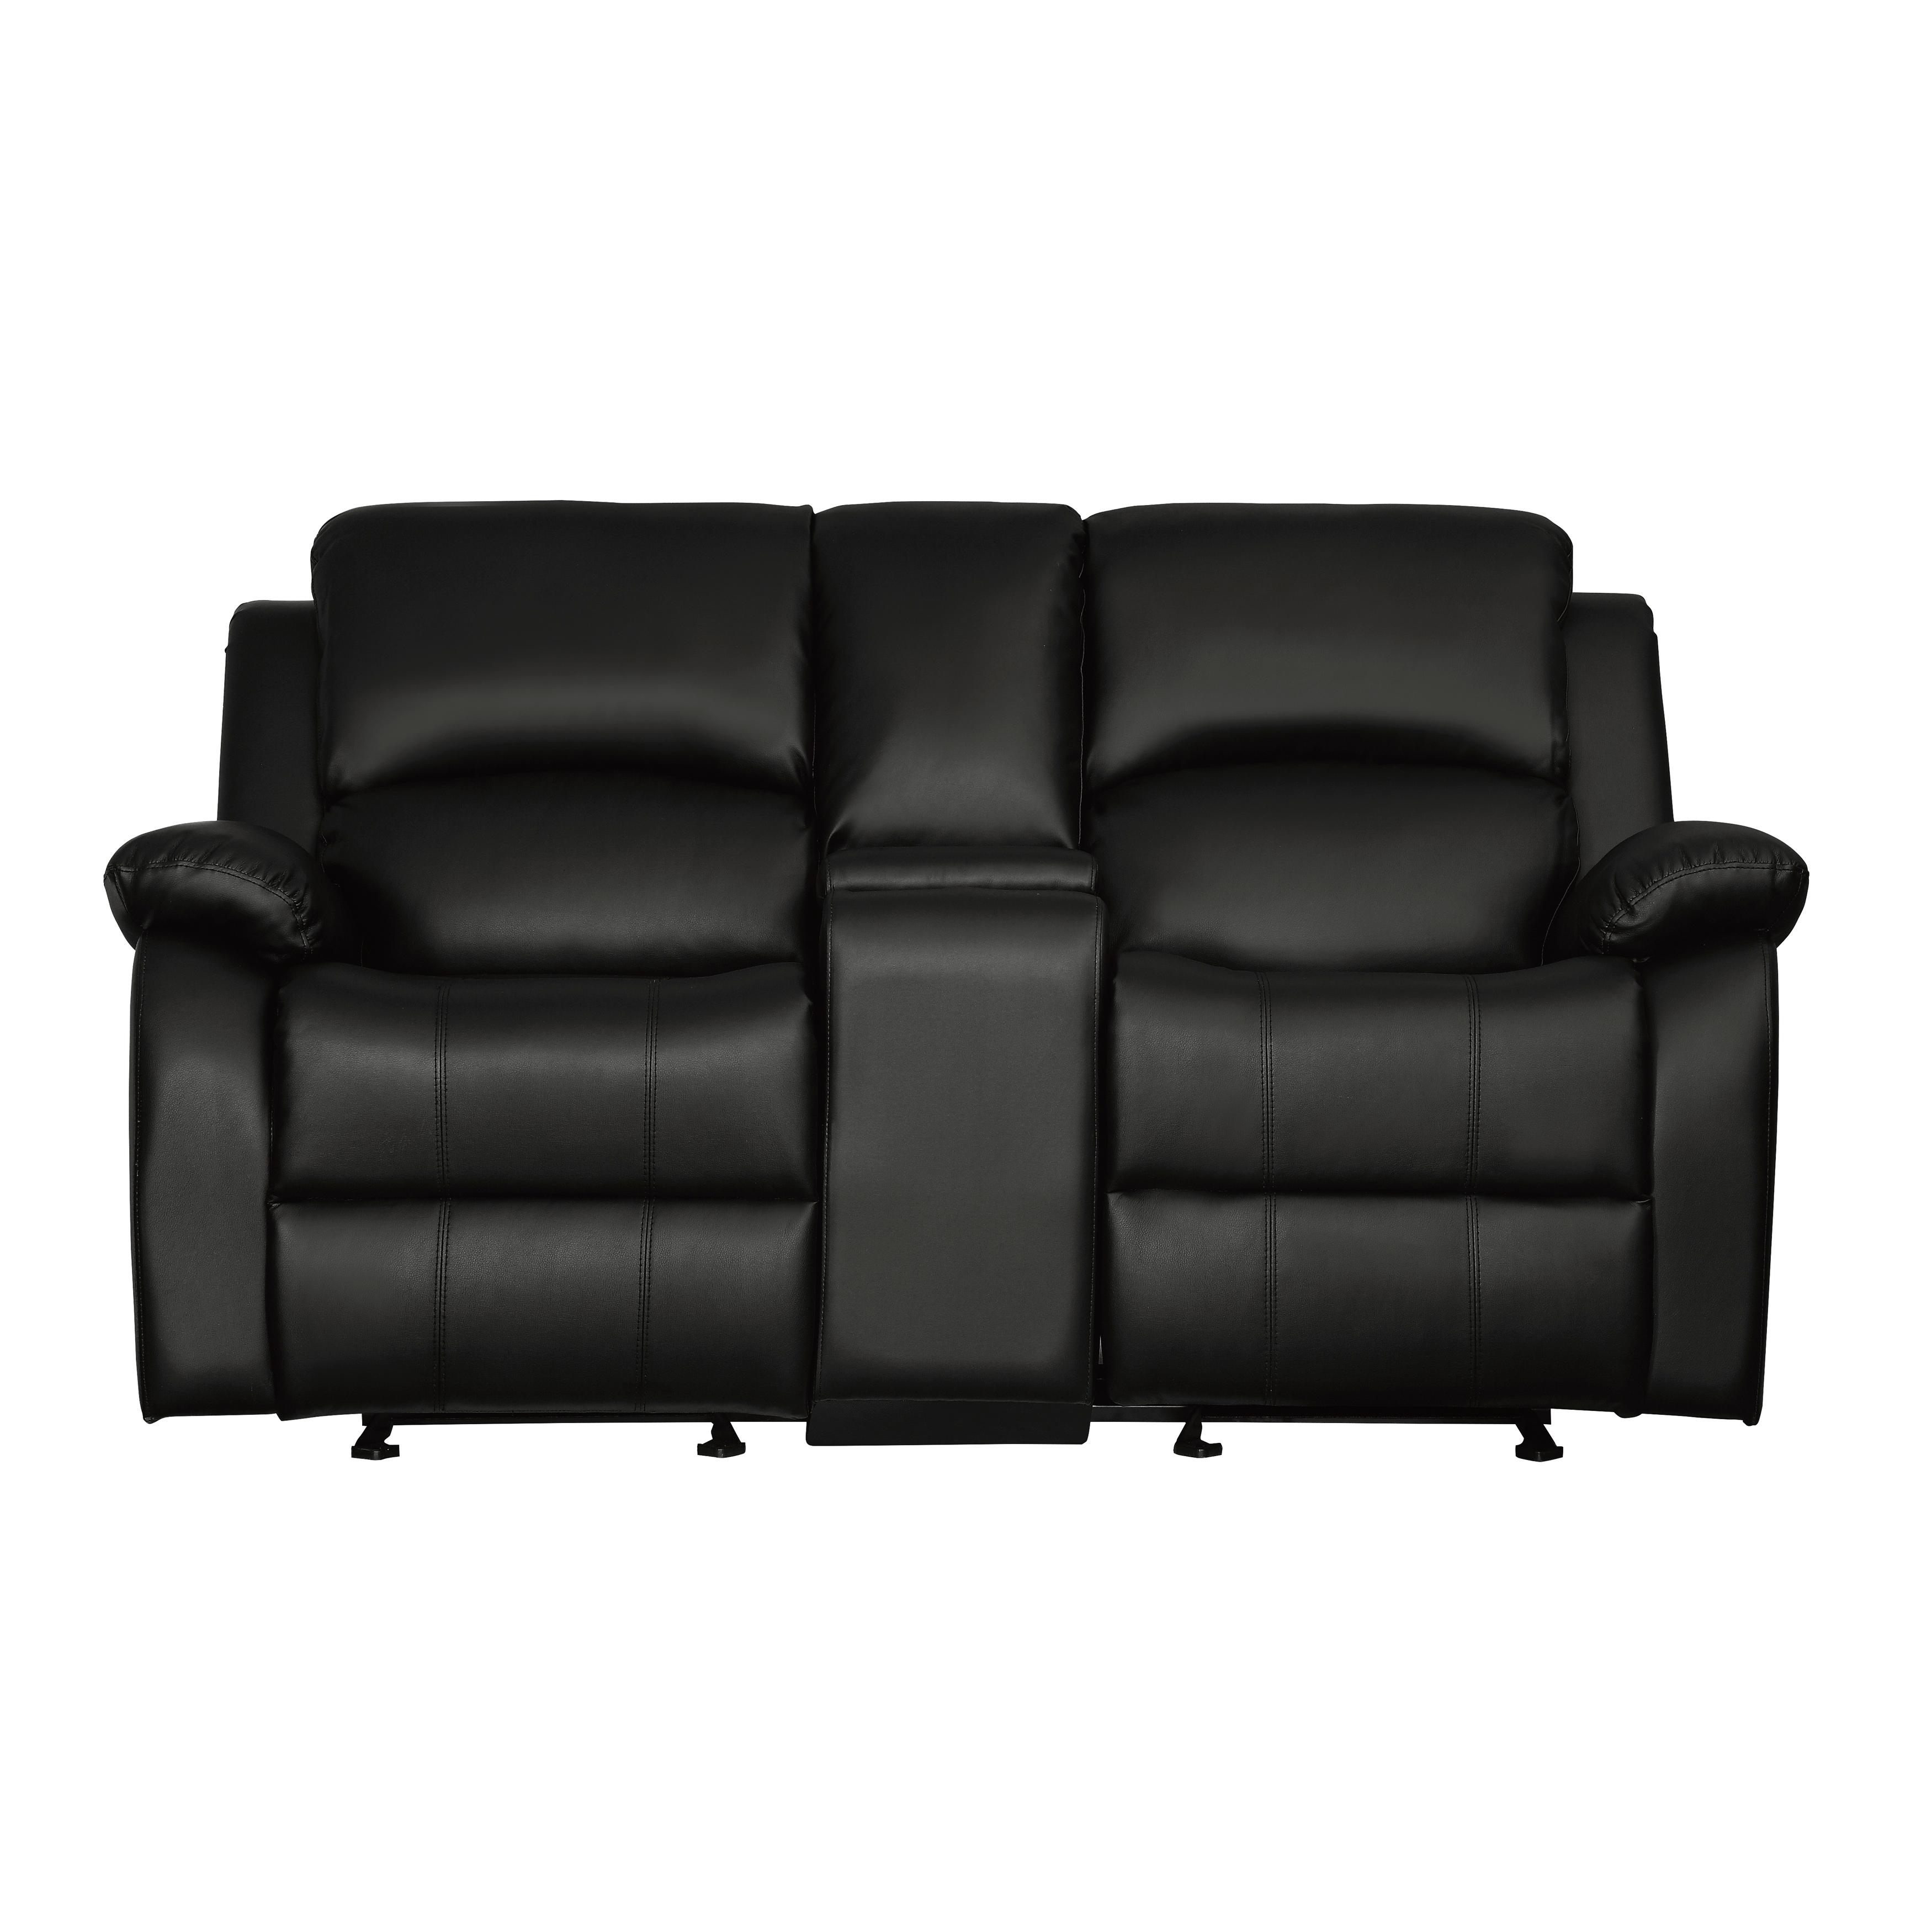 

    
Transitional Black Faux Leather Reclining Loveseat Homelegance 9928BLK-2 Clarkdale
